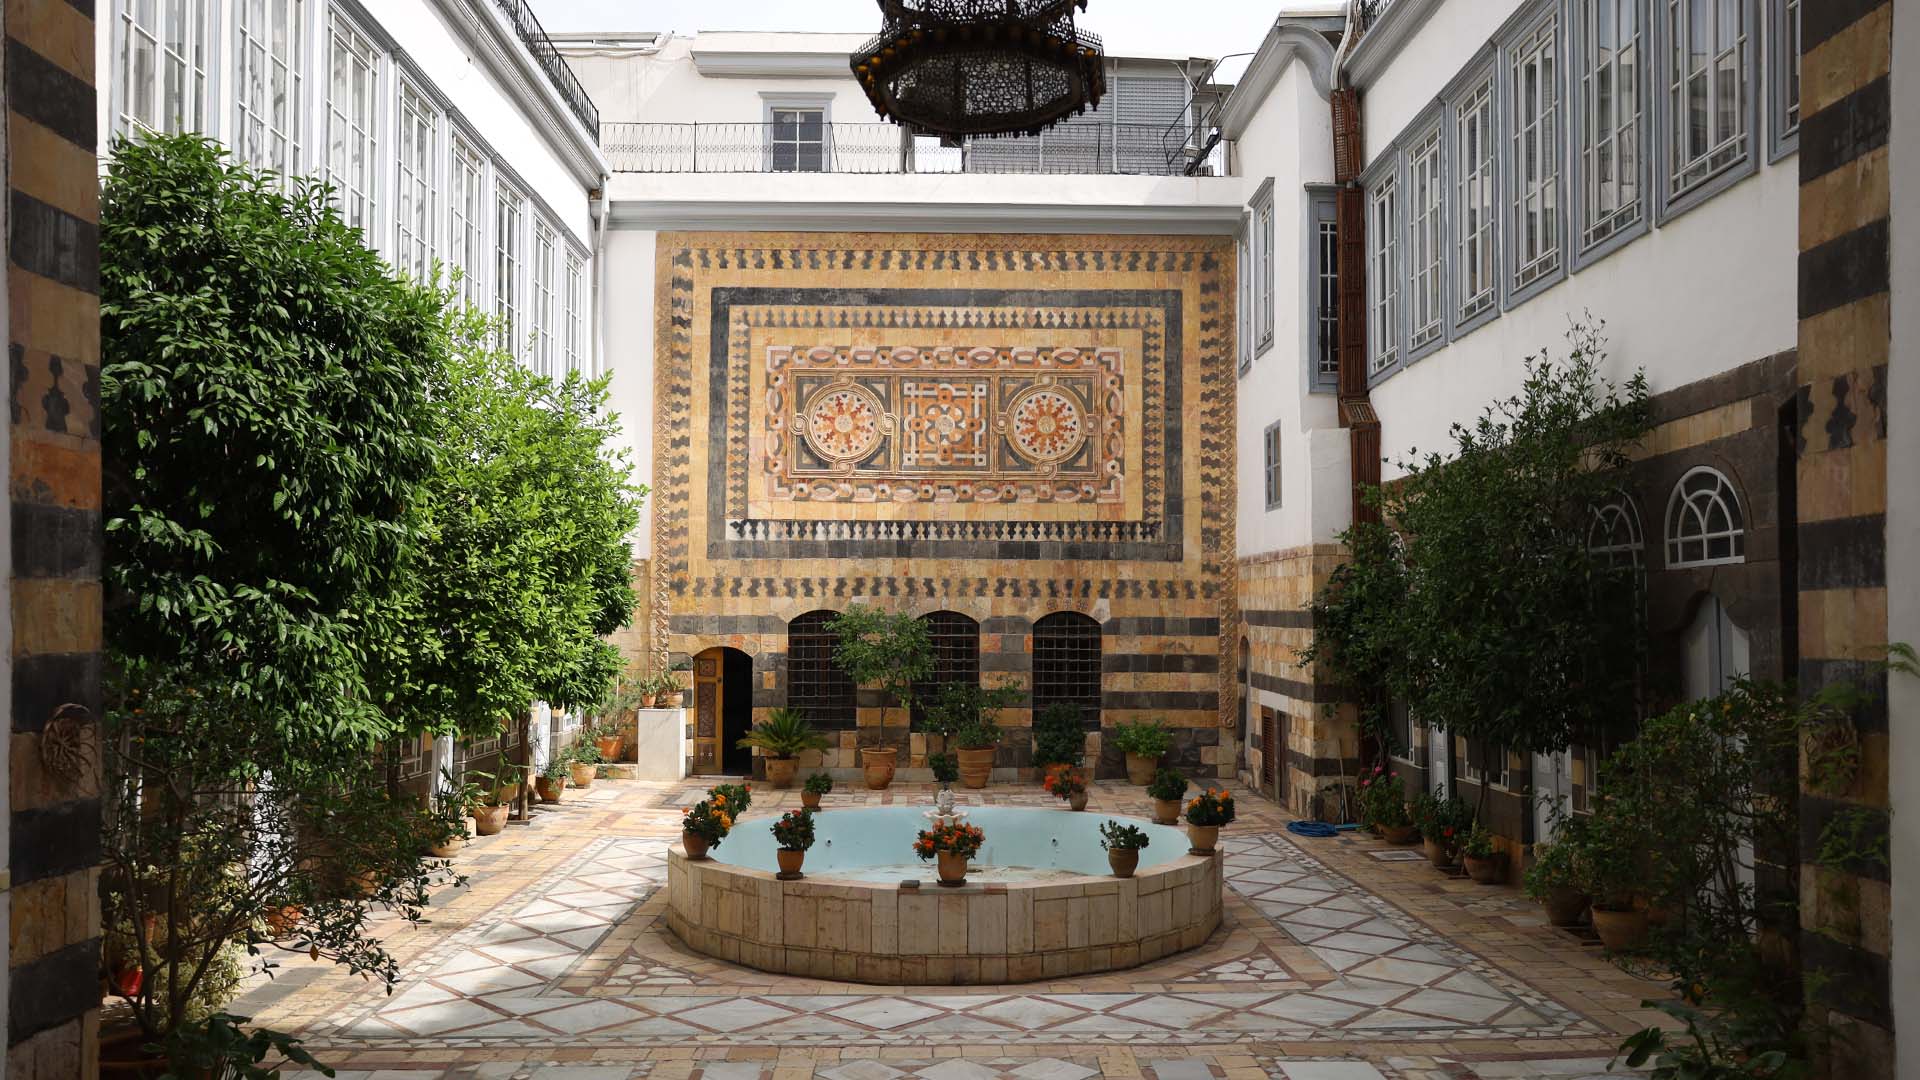 The photograph captures the alluring ambiance of the main courtyard of The Danish Institute of Damascus, an architectural gem gracefully nestled within the old Damascus.